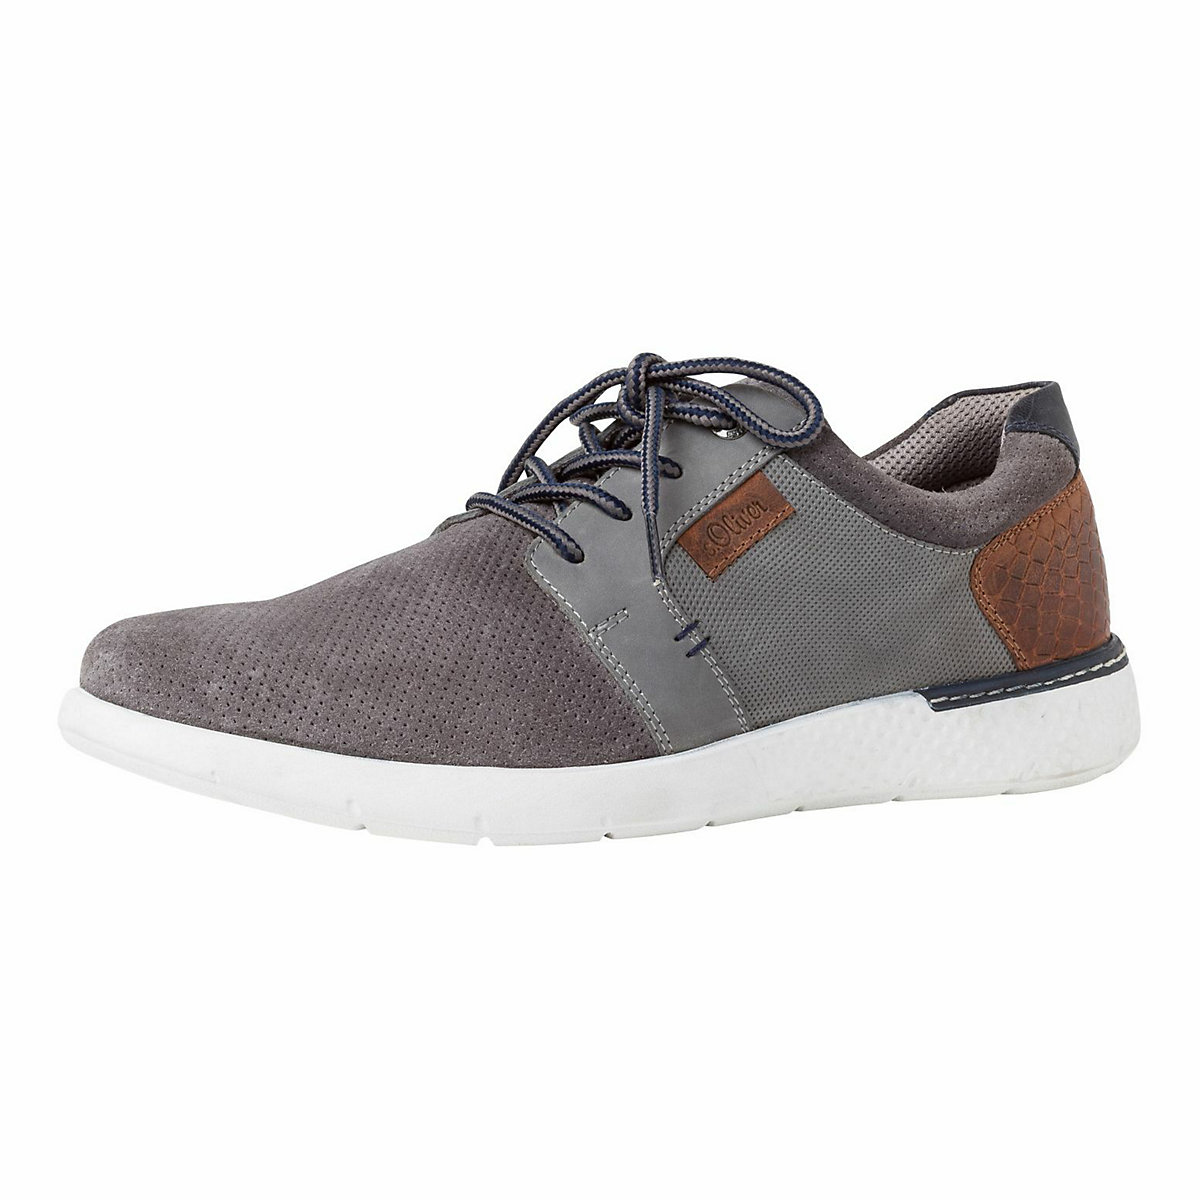 s.Oliver s.Oliver Sneaker Sneakers Low grau